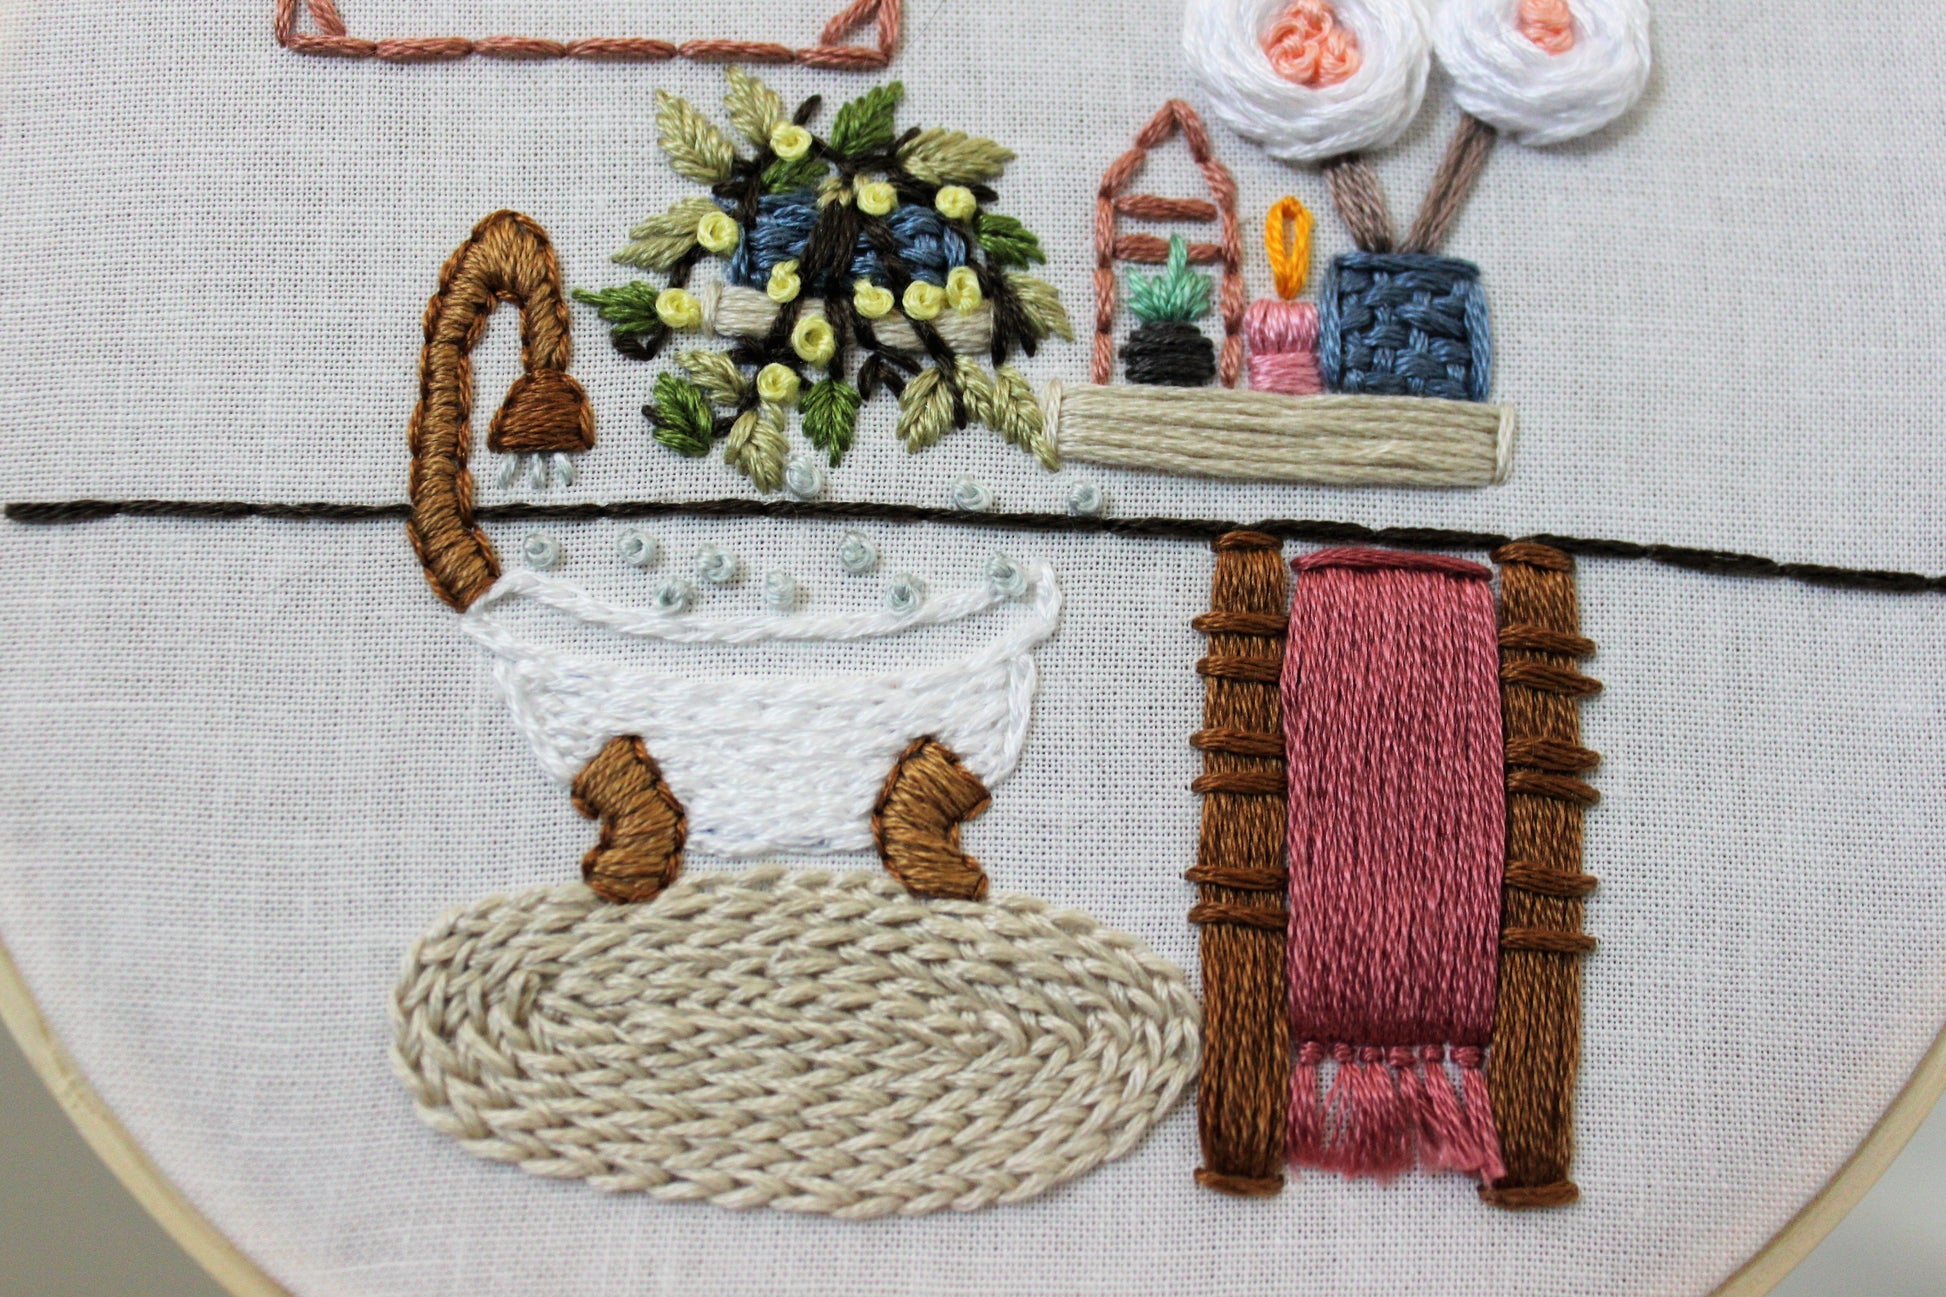 Modern embroidery